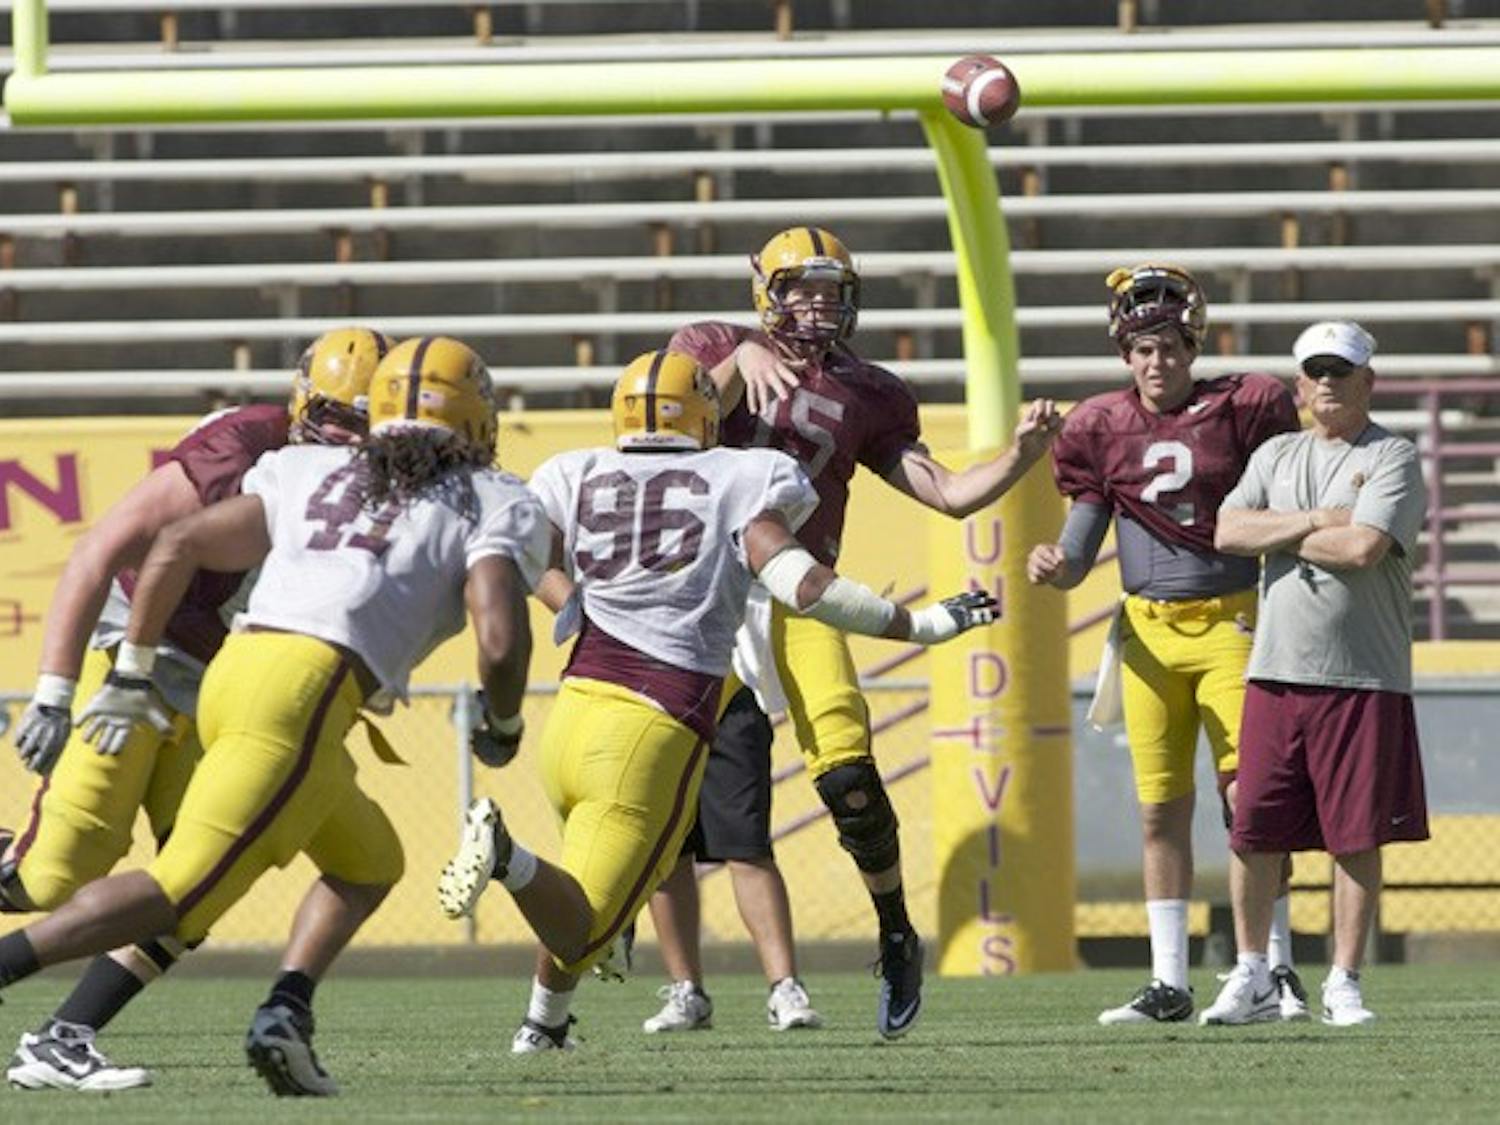 Position Battle: ASU redshirt freshman quarterback Taylor Kelly tosses a short pass during the Sun Devils’ team scrimmage on Saturday in Tempe. Kelly is competing with incoming freshman Mike Bercovici (No. 2 uniform) to back up junior quarterback Brock Osweiler for the 2011 season. (Photo by Scott Stuk)